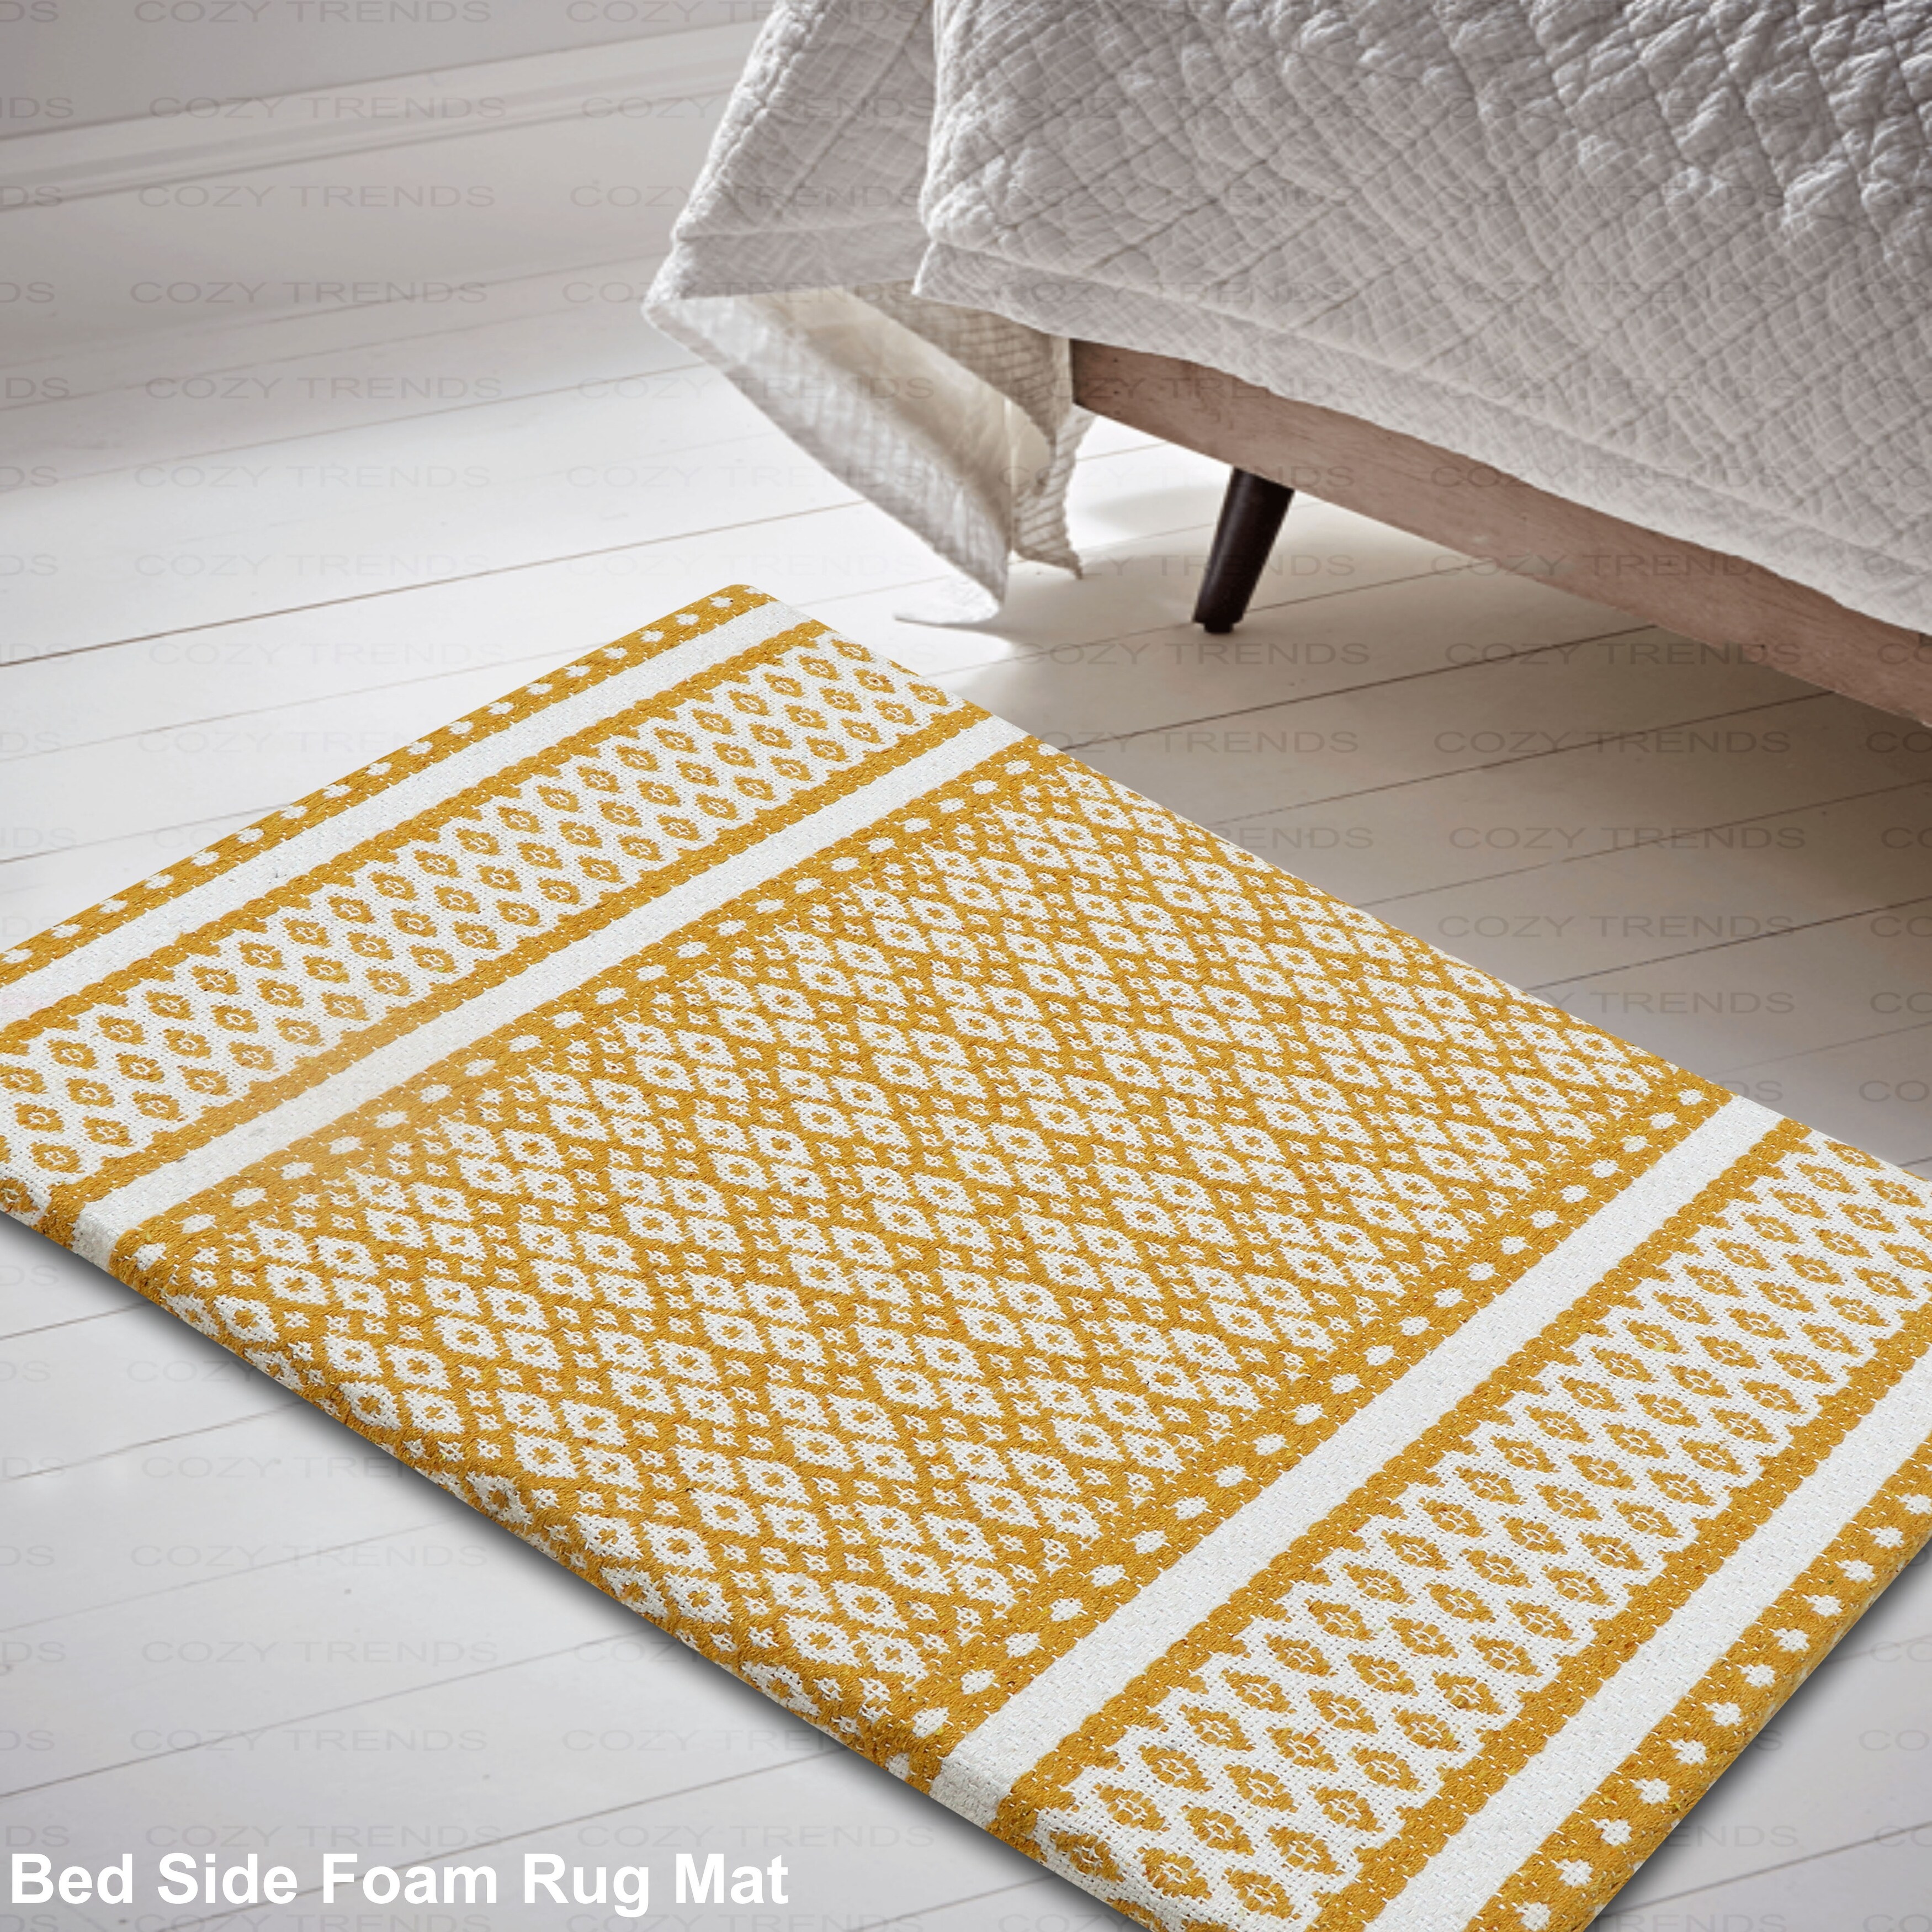 https://ak1.ostkcdn.com/images/products/is/images/direct/0ae12aabb24c19959a9a8e0f8b4a1c926cd353bc/Cotton-Kitchen-Mat-Cushioned-Anti-Fatigue-Rug%2C-Non-Slip-Mats-Comfort-Foam-Rug-for-Kitchen%2C-Office%2C-Sink%2C-Laundry---18%27%27x30%27%27.jpg